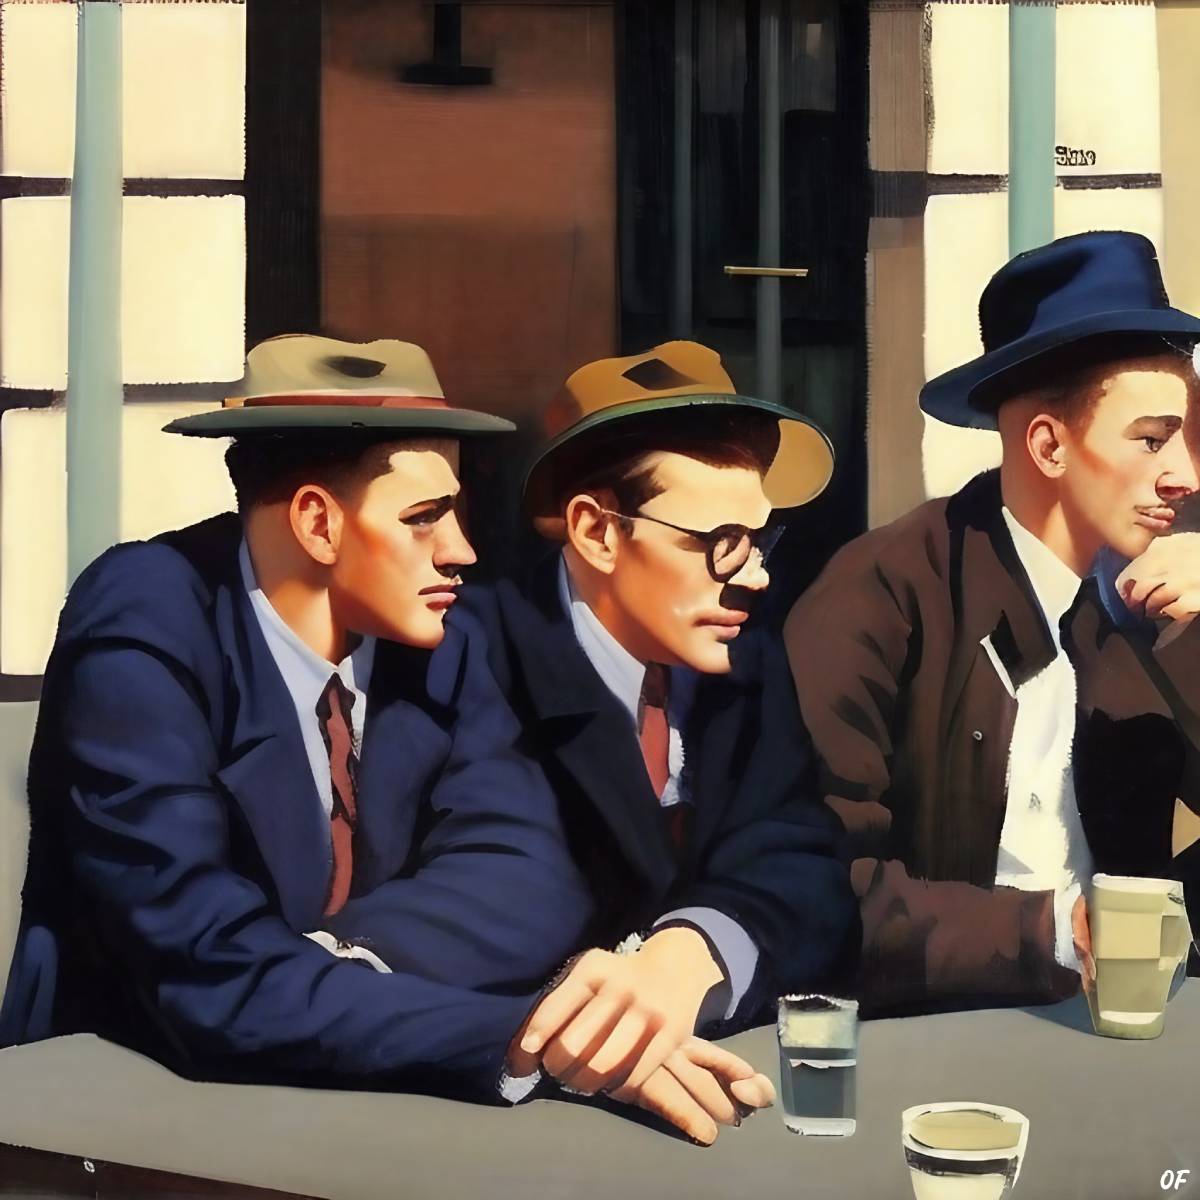 A group of men speaking Polari outside a cafe in 1950s London.